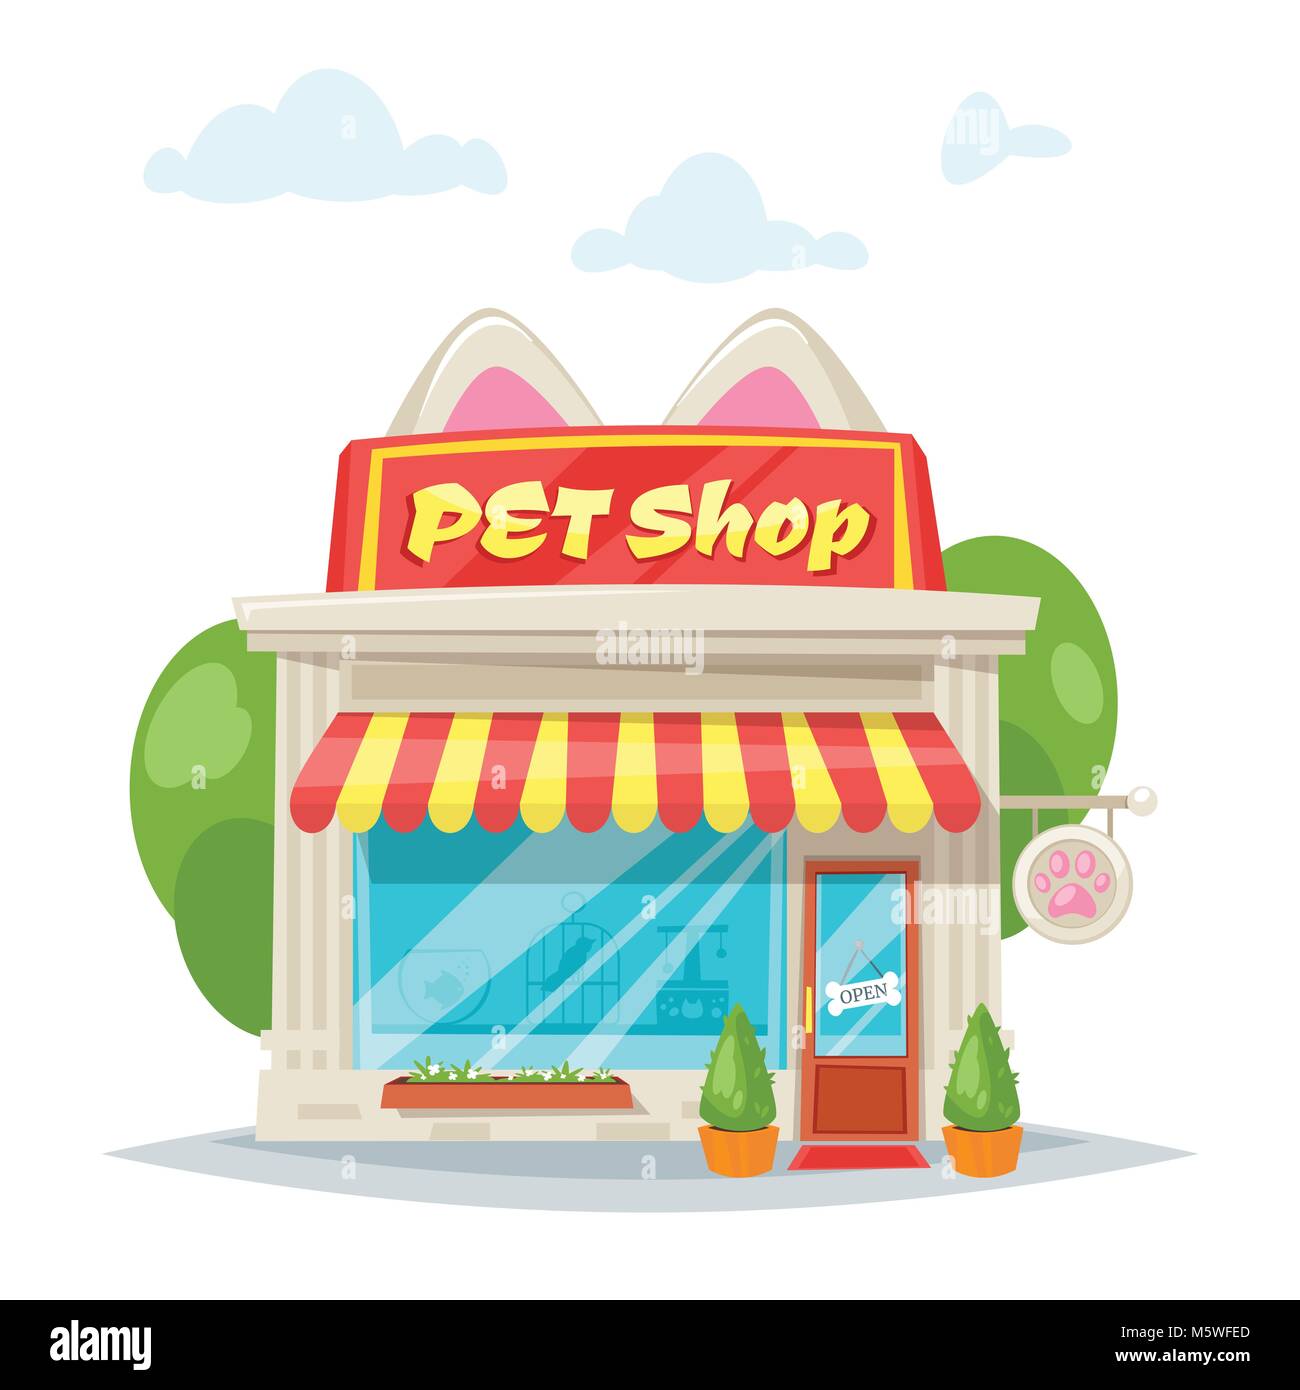 Vector cartoon style illustration of pet shop facade with bright banner with cat ears. Store building exterior. Isolated on white background. Showcase Stock Vector